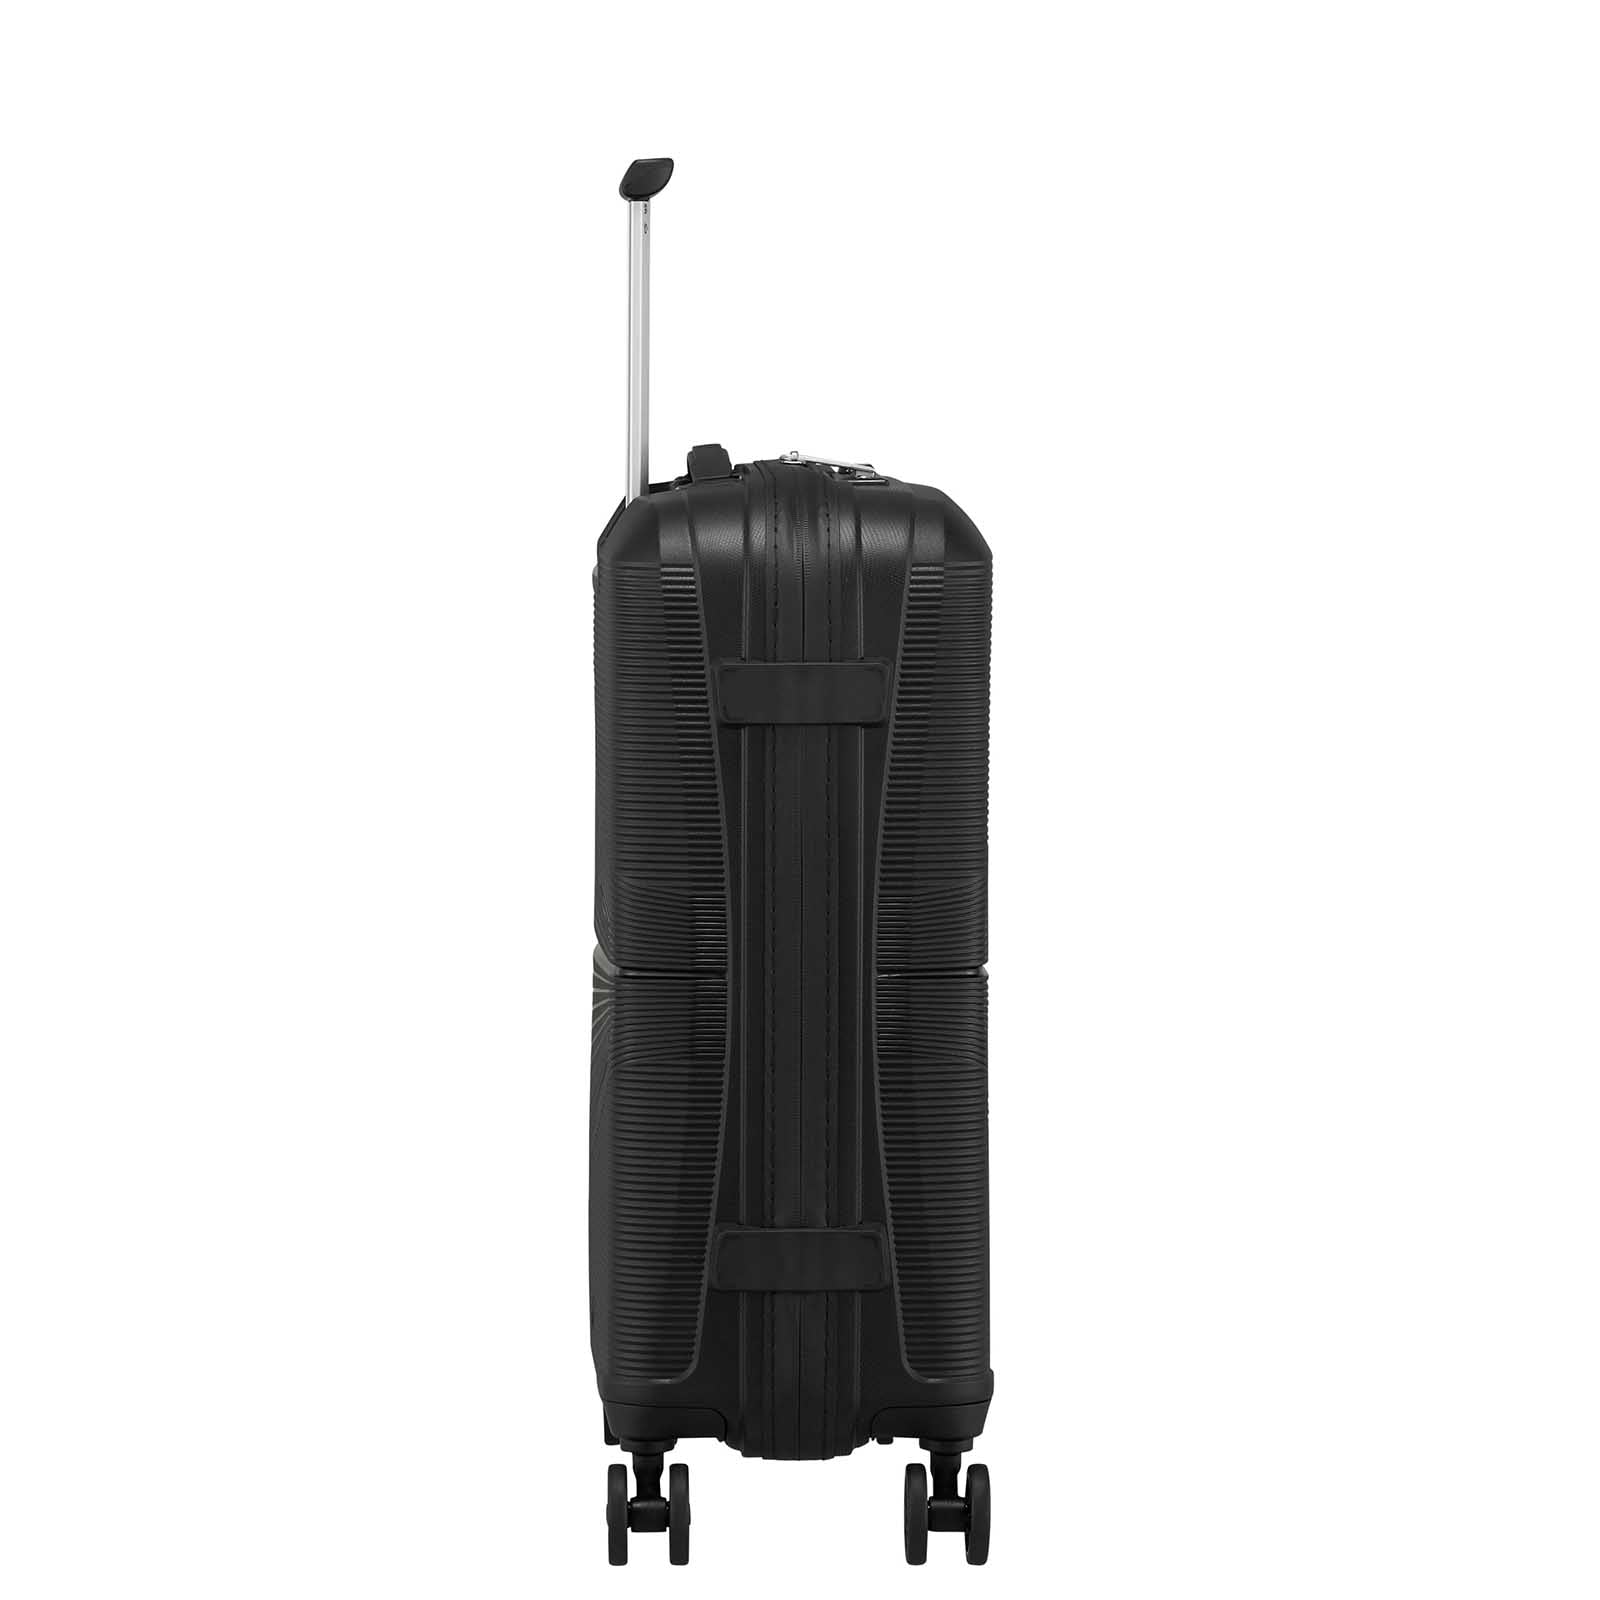 American-Tourister-Airconic-55cm-Carry-On-Suitcase-Onyx-Black-Side